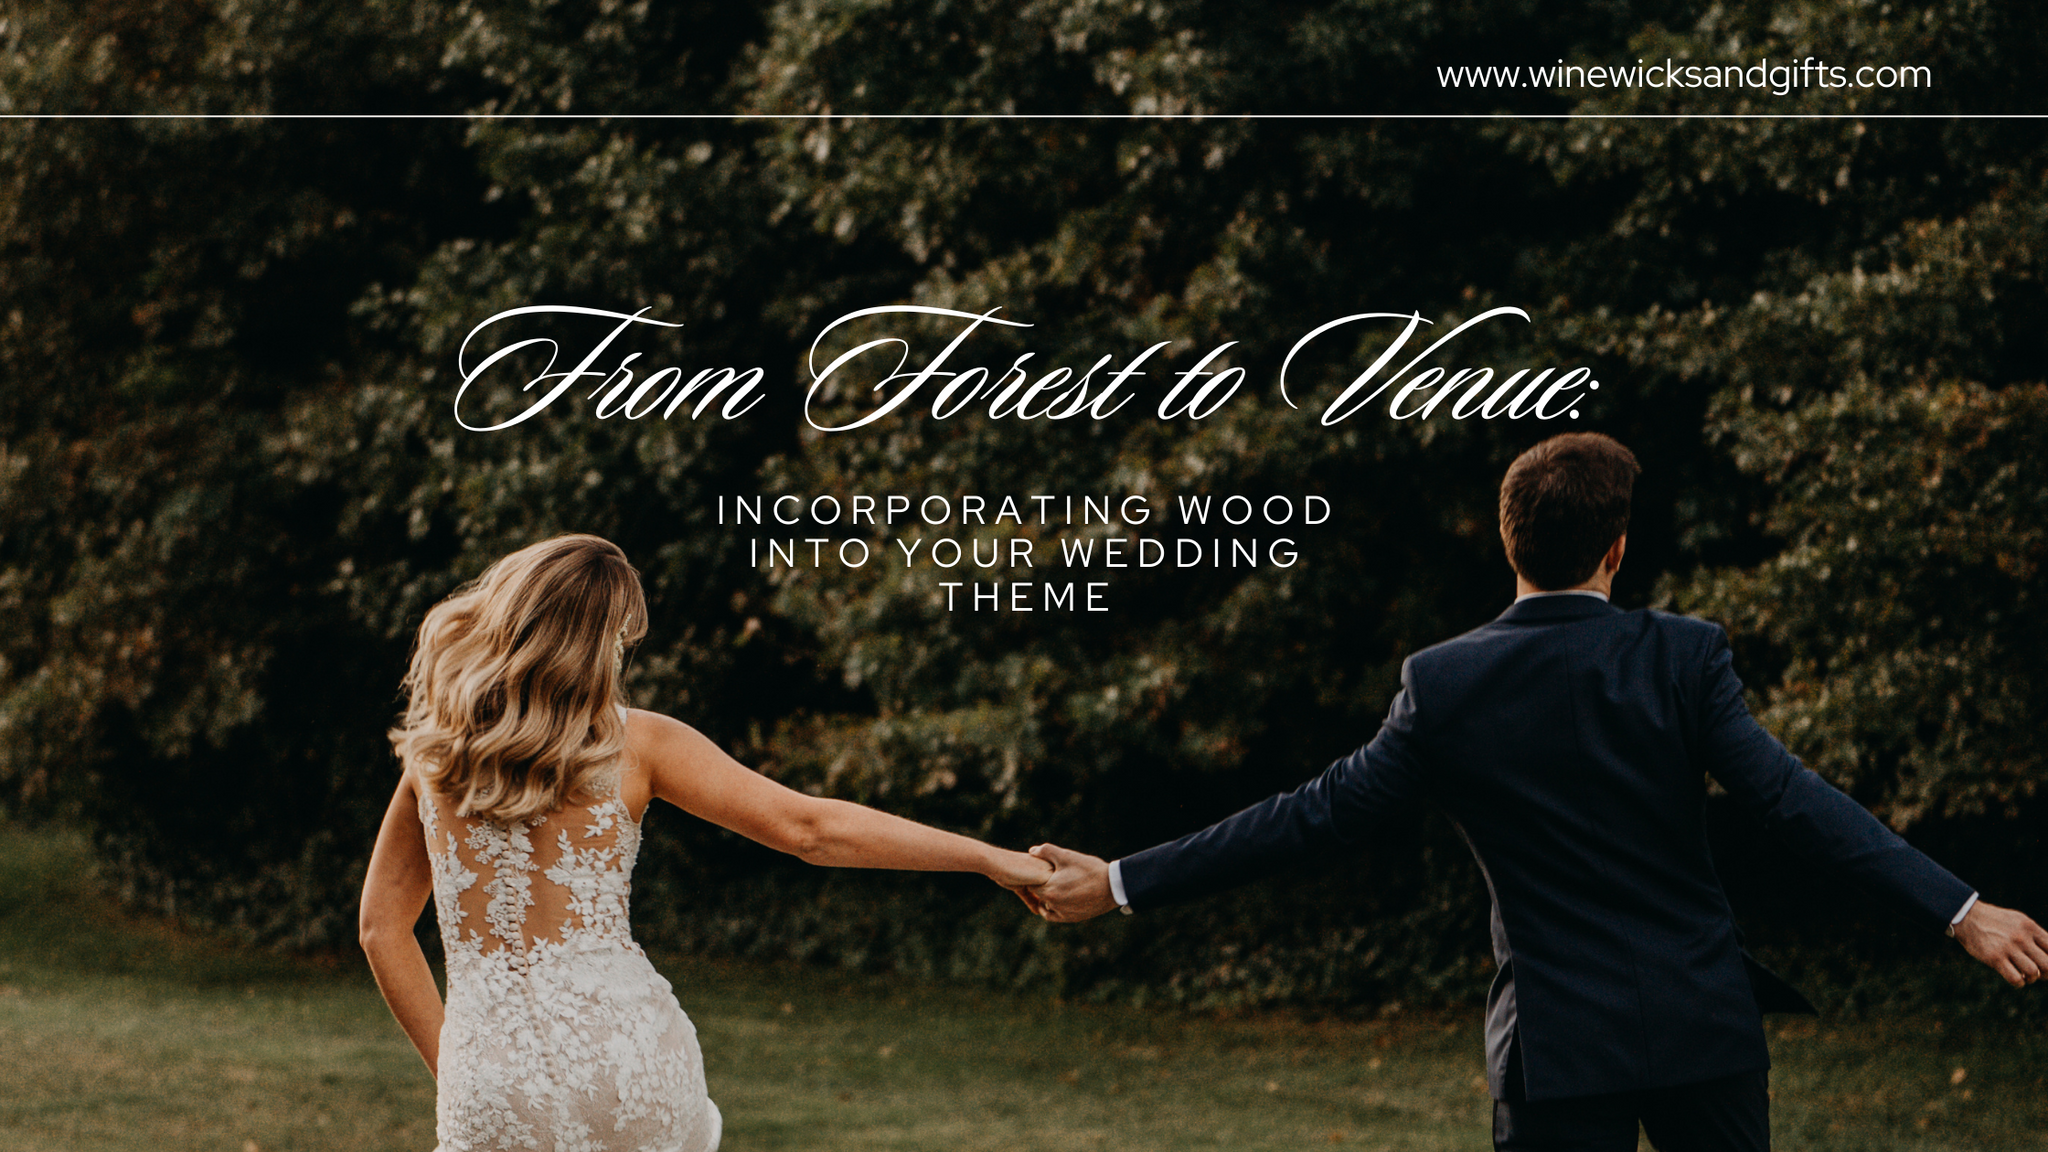 From Forest to Venue: Incorporating Wood into Your Wedding Theme